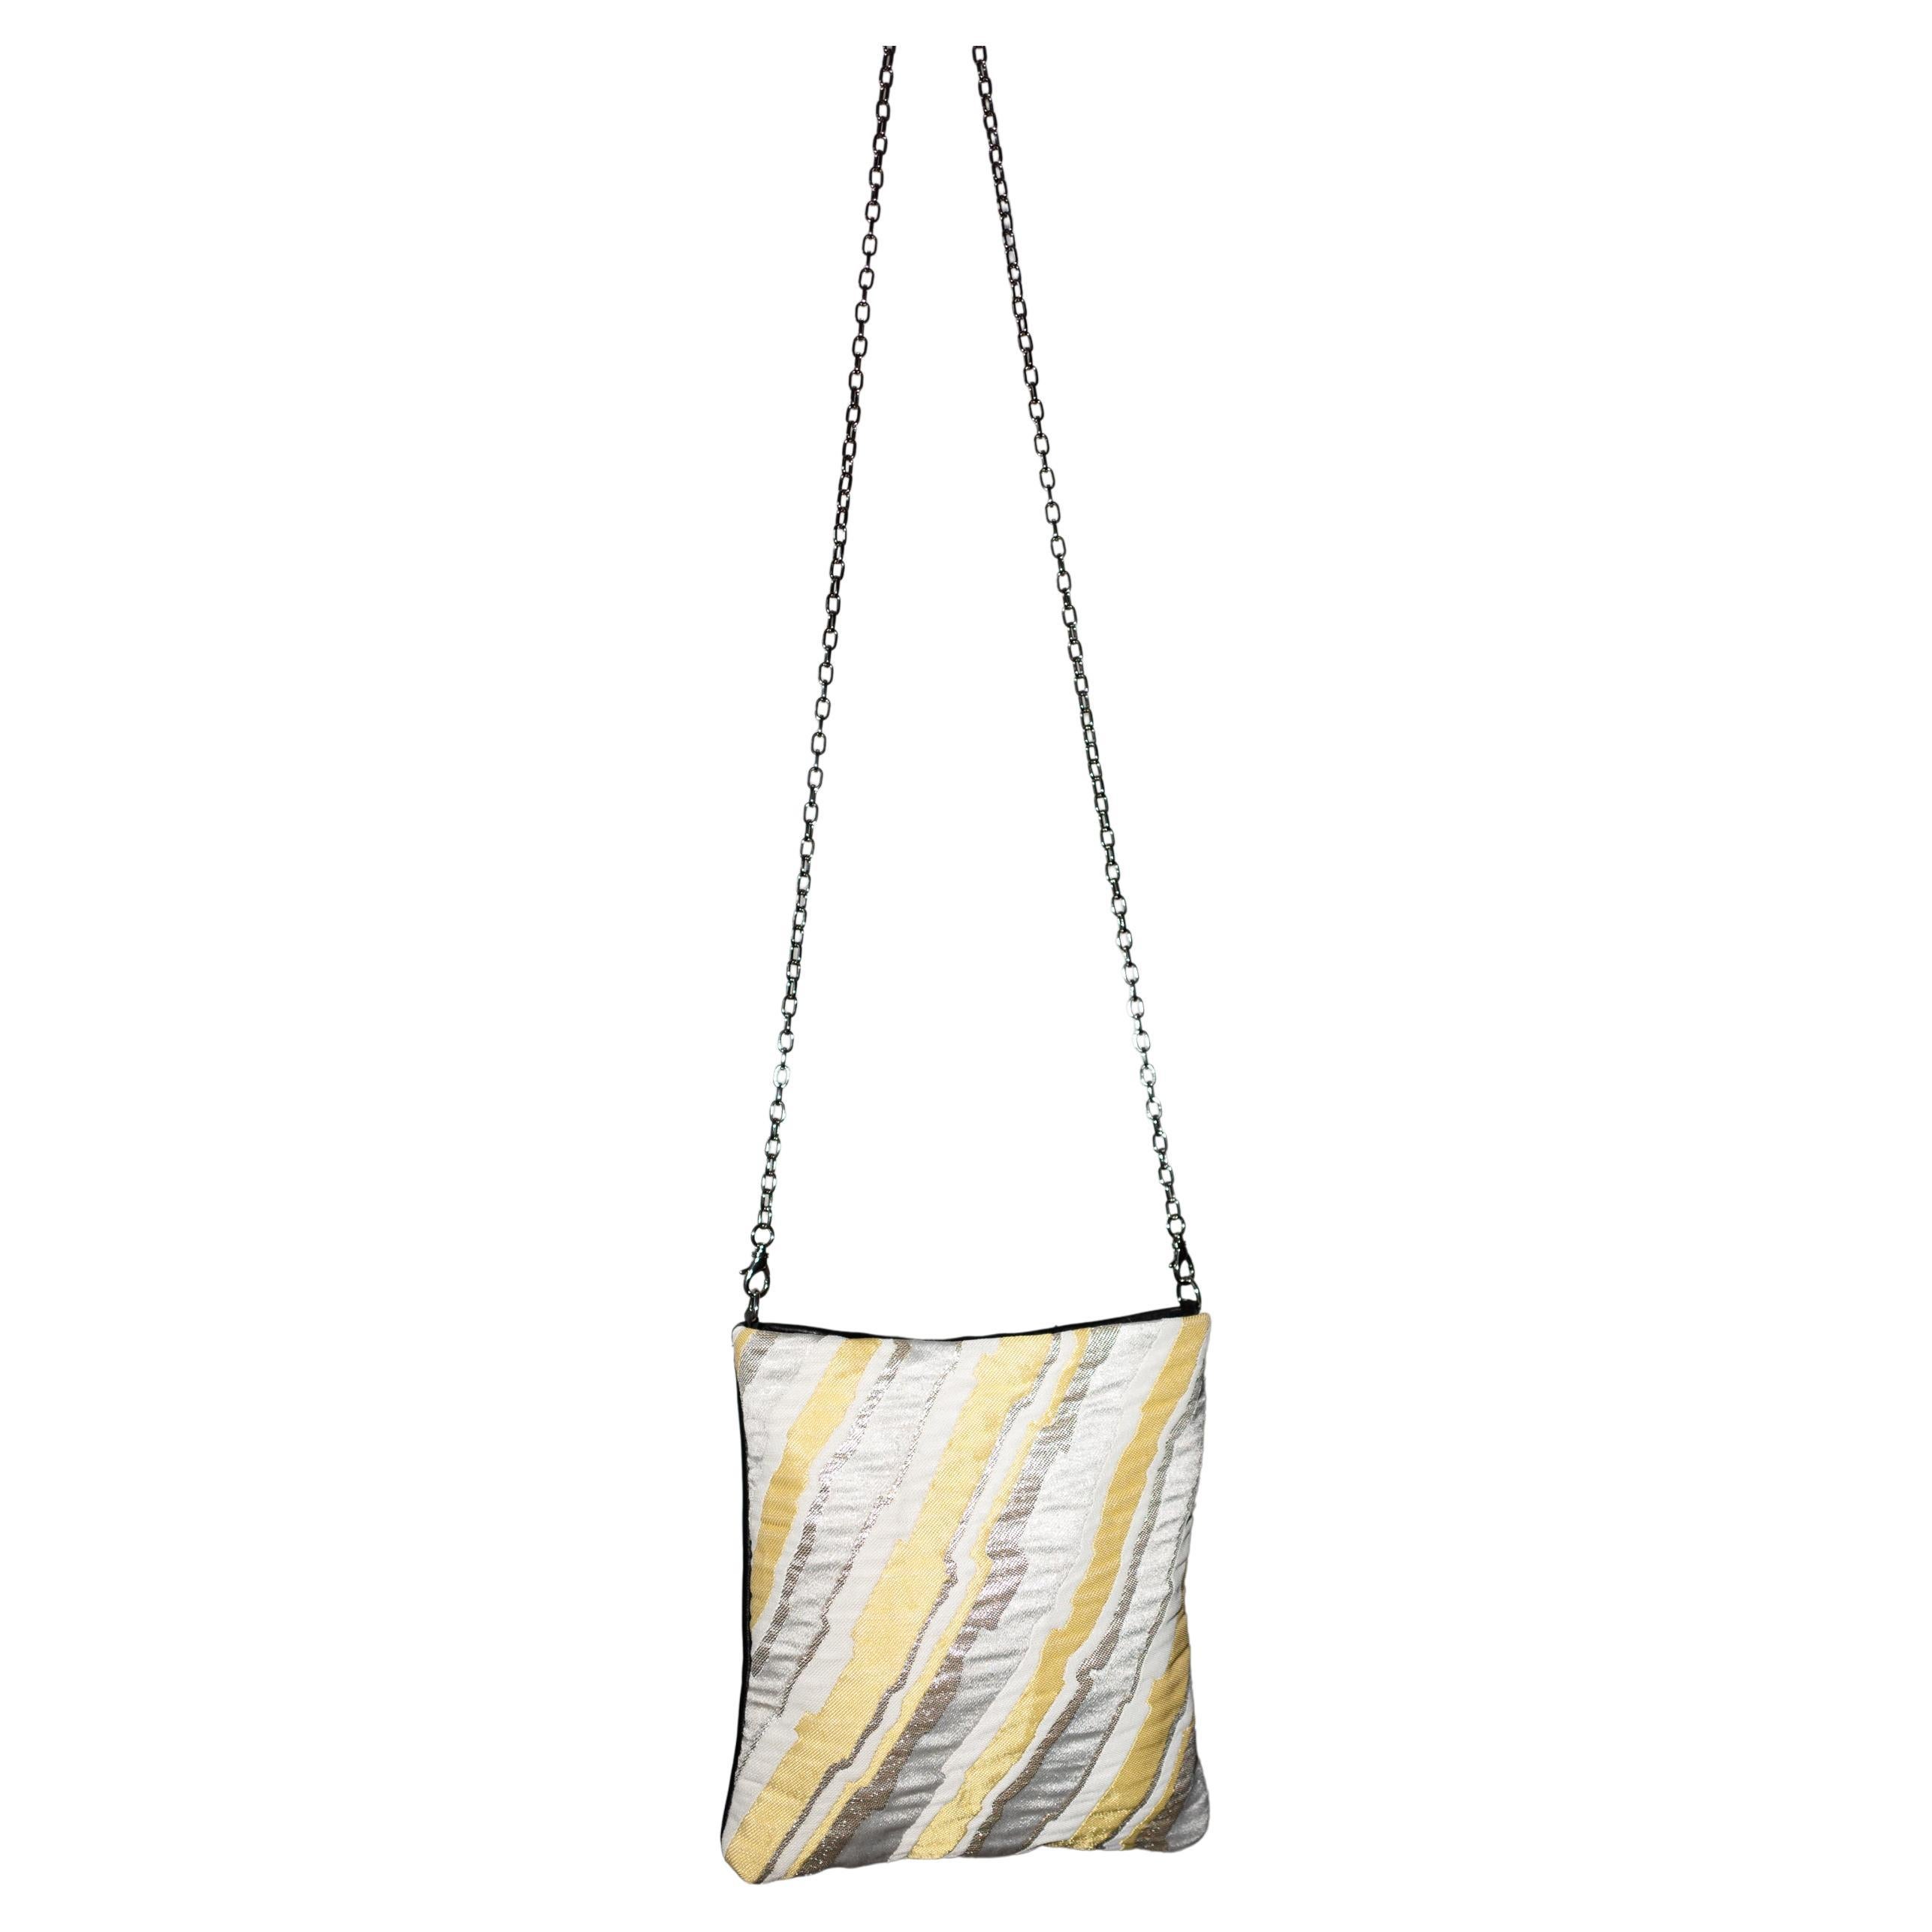 One of a kind Evening Shoulder Bags in Vintage Italian Silver Lurex White Pastel Yellow Brocade on one one side and on the other side Black Italian Napa Leather, Italian Palladium Plated Brass Shoulder Chain Detachable J Dauphin

Size: Height 21 cm,